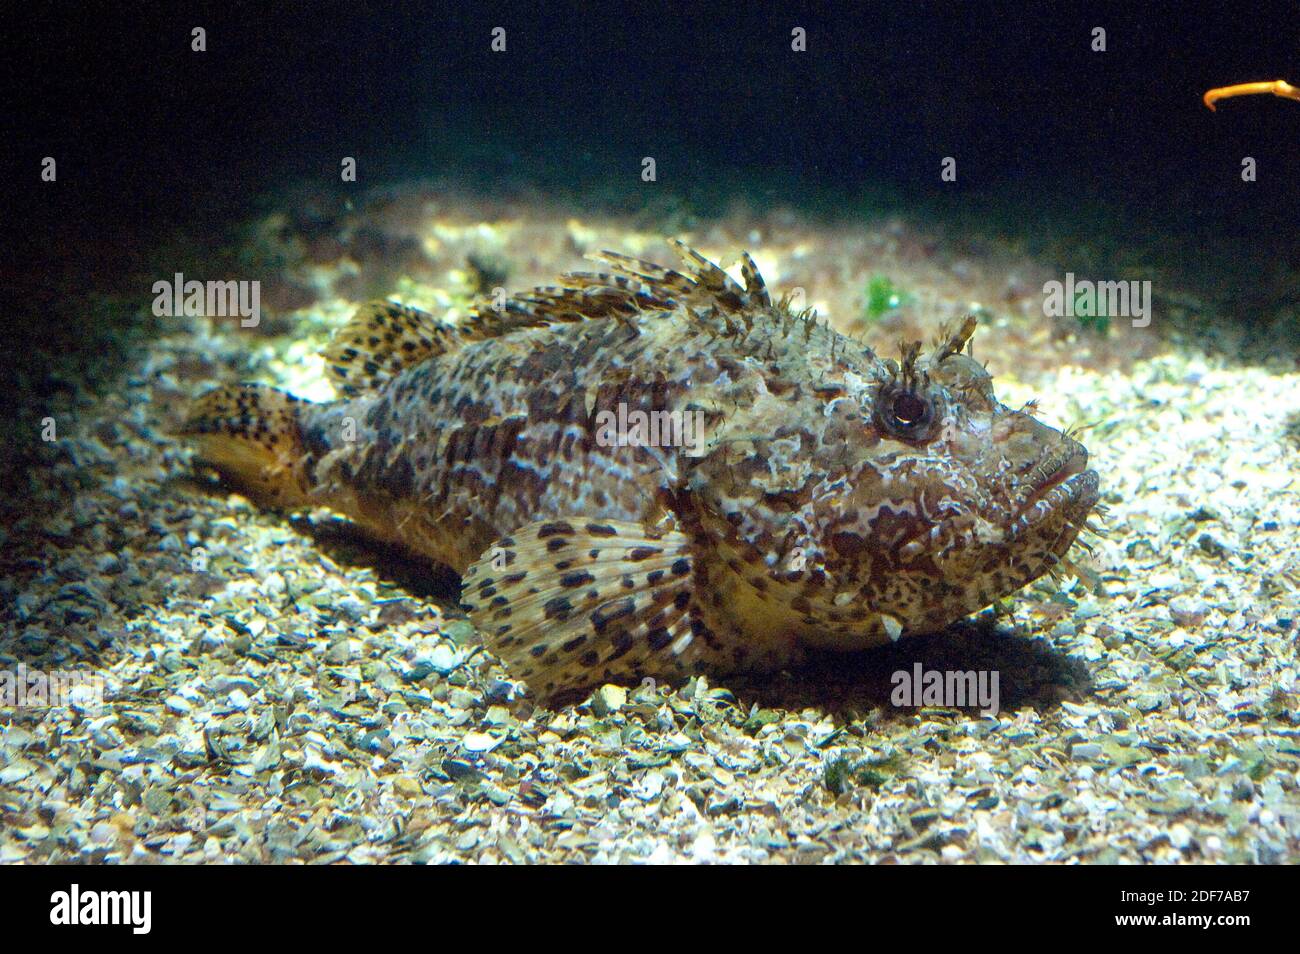 Black scorpionfish (Scorpaena porcus) is a poisonous marine fish native to Mediterranean Sea and eastern Atlantic Ocean from UK to Canary Islands. Stock Photo